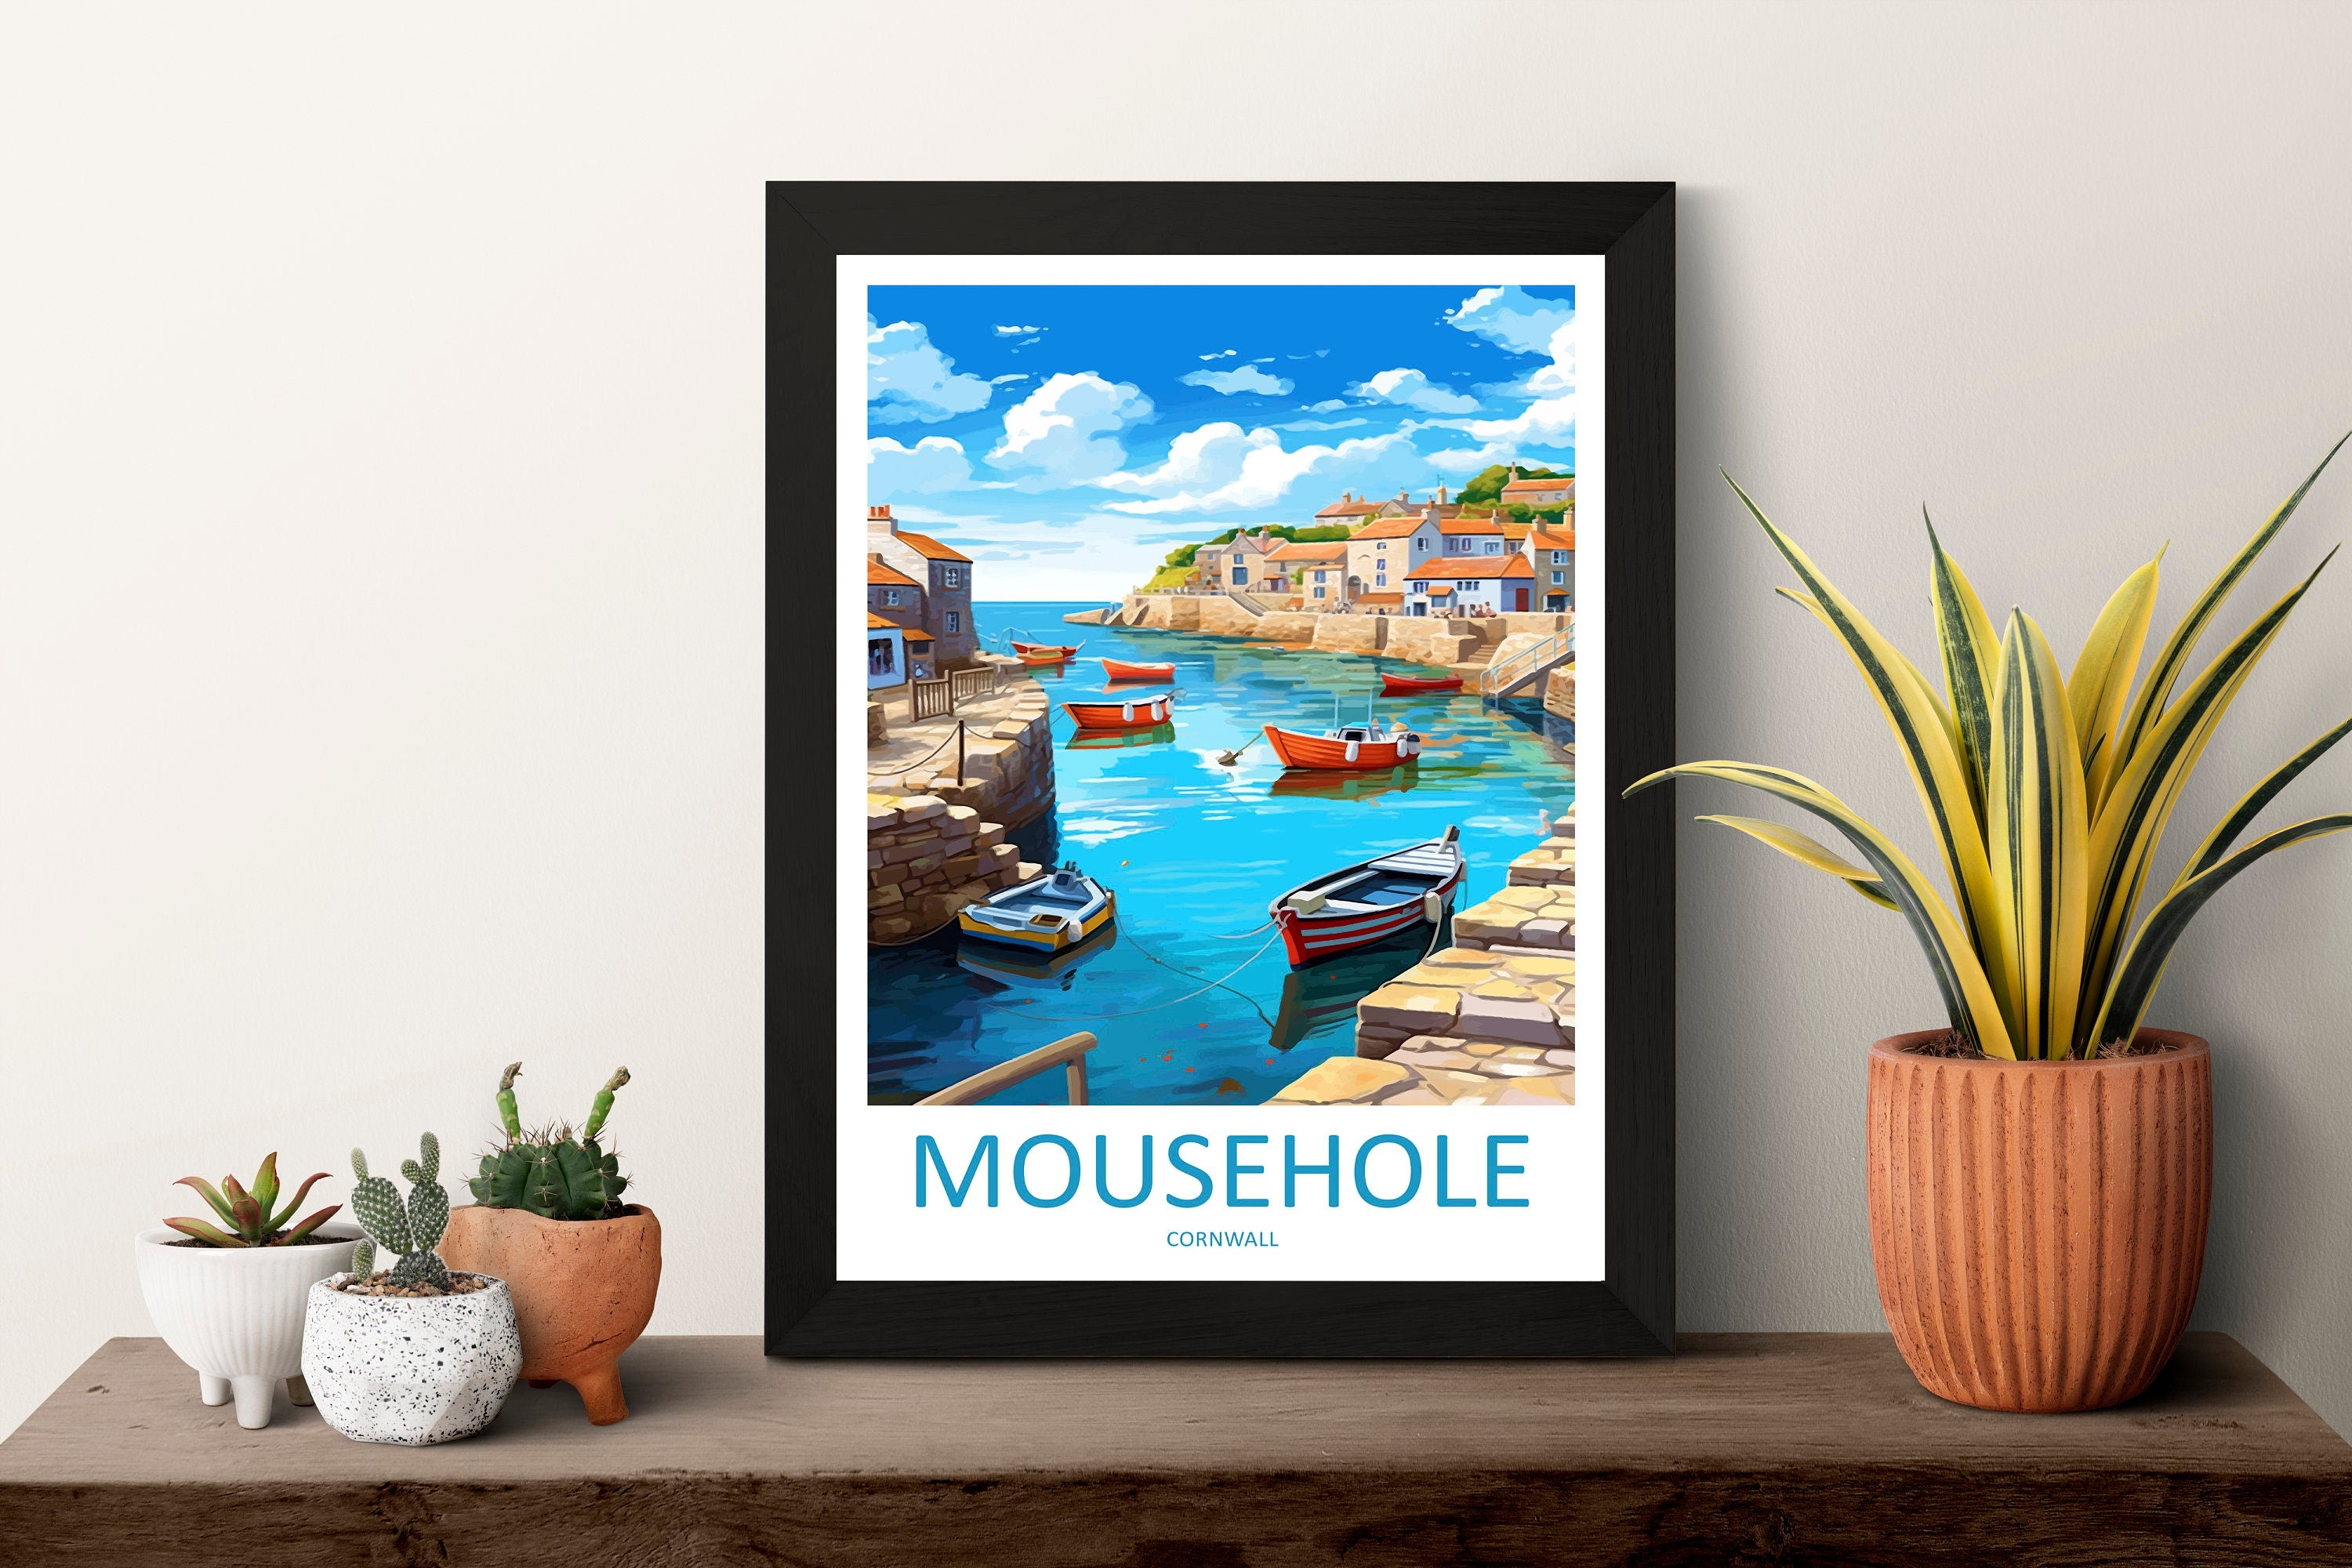 Mousehole Travel Print Wall Art Mousehole Wall Hanging Home Décor Mousehole Gift Art Lovers England Art Lover Gift Mousehole Poster